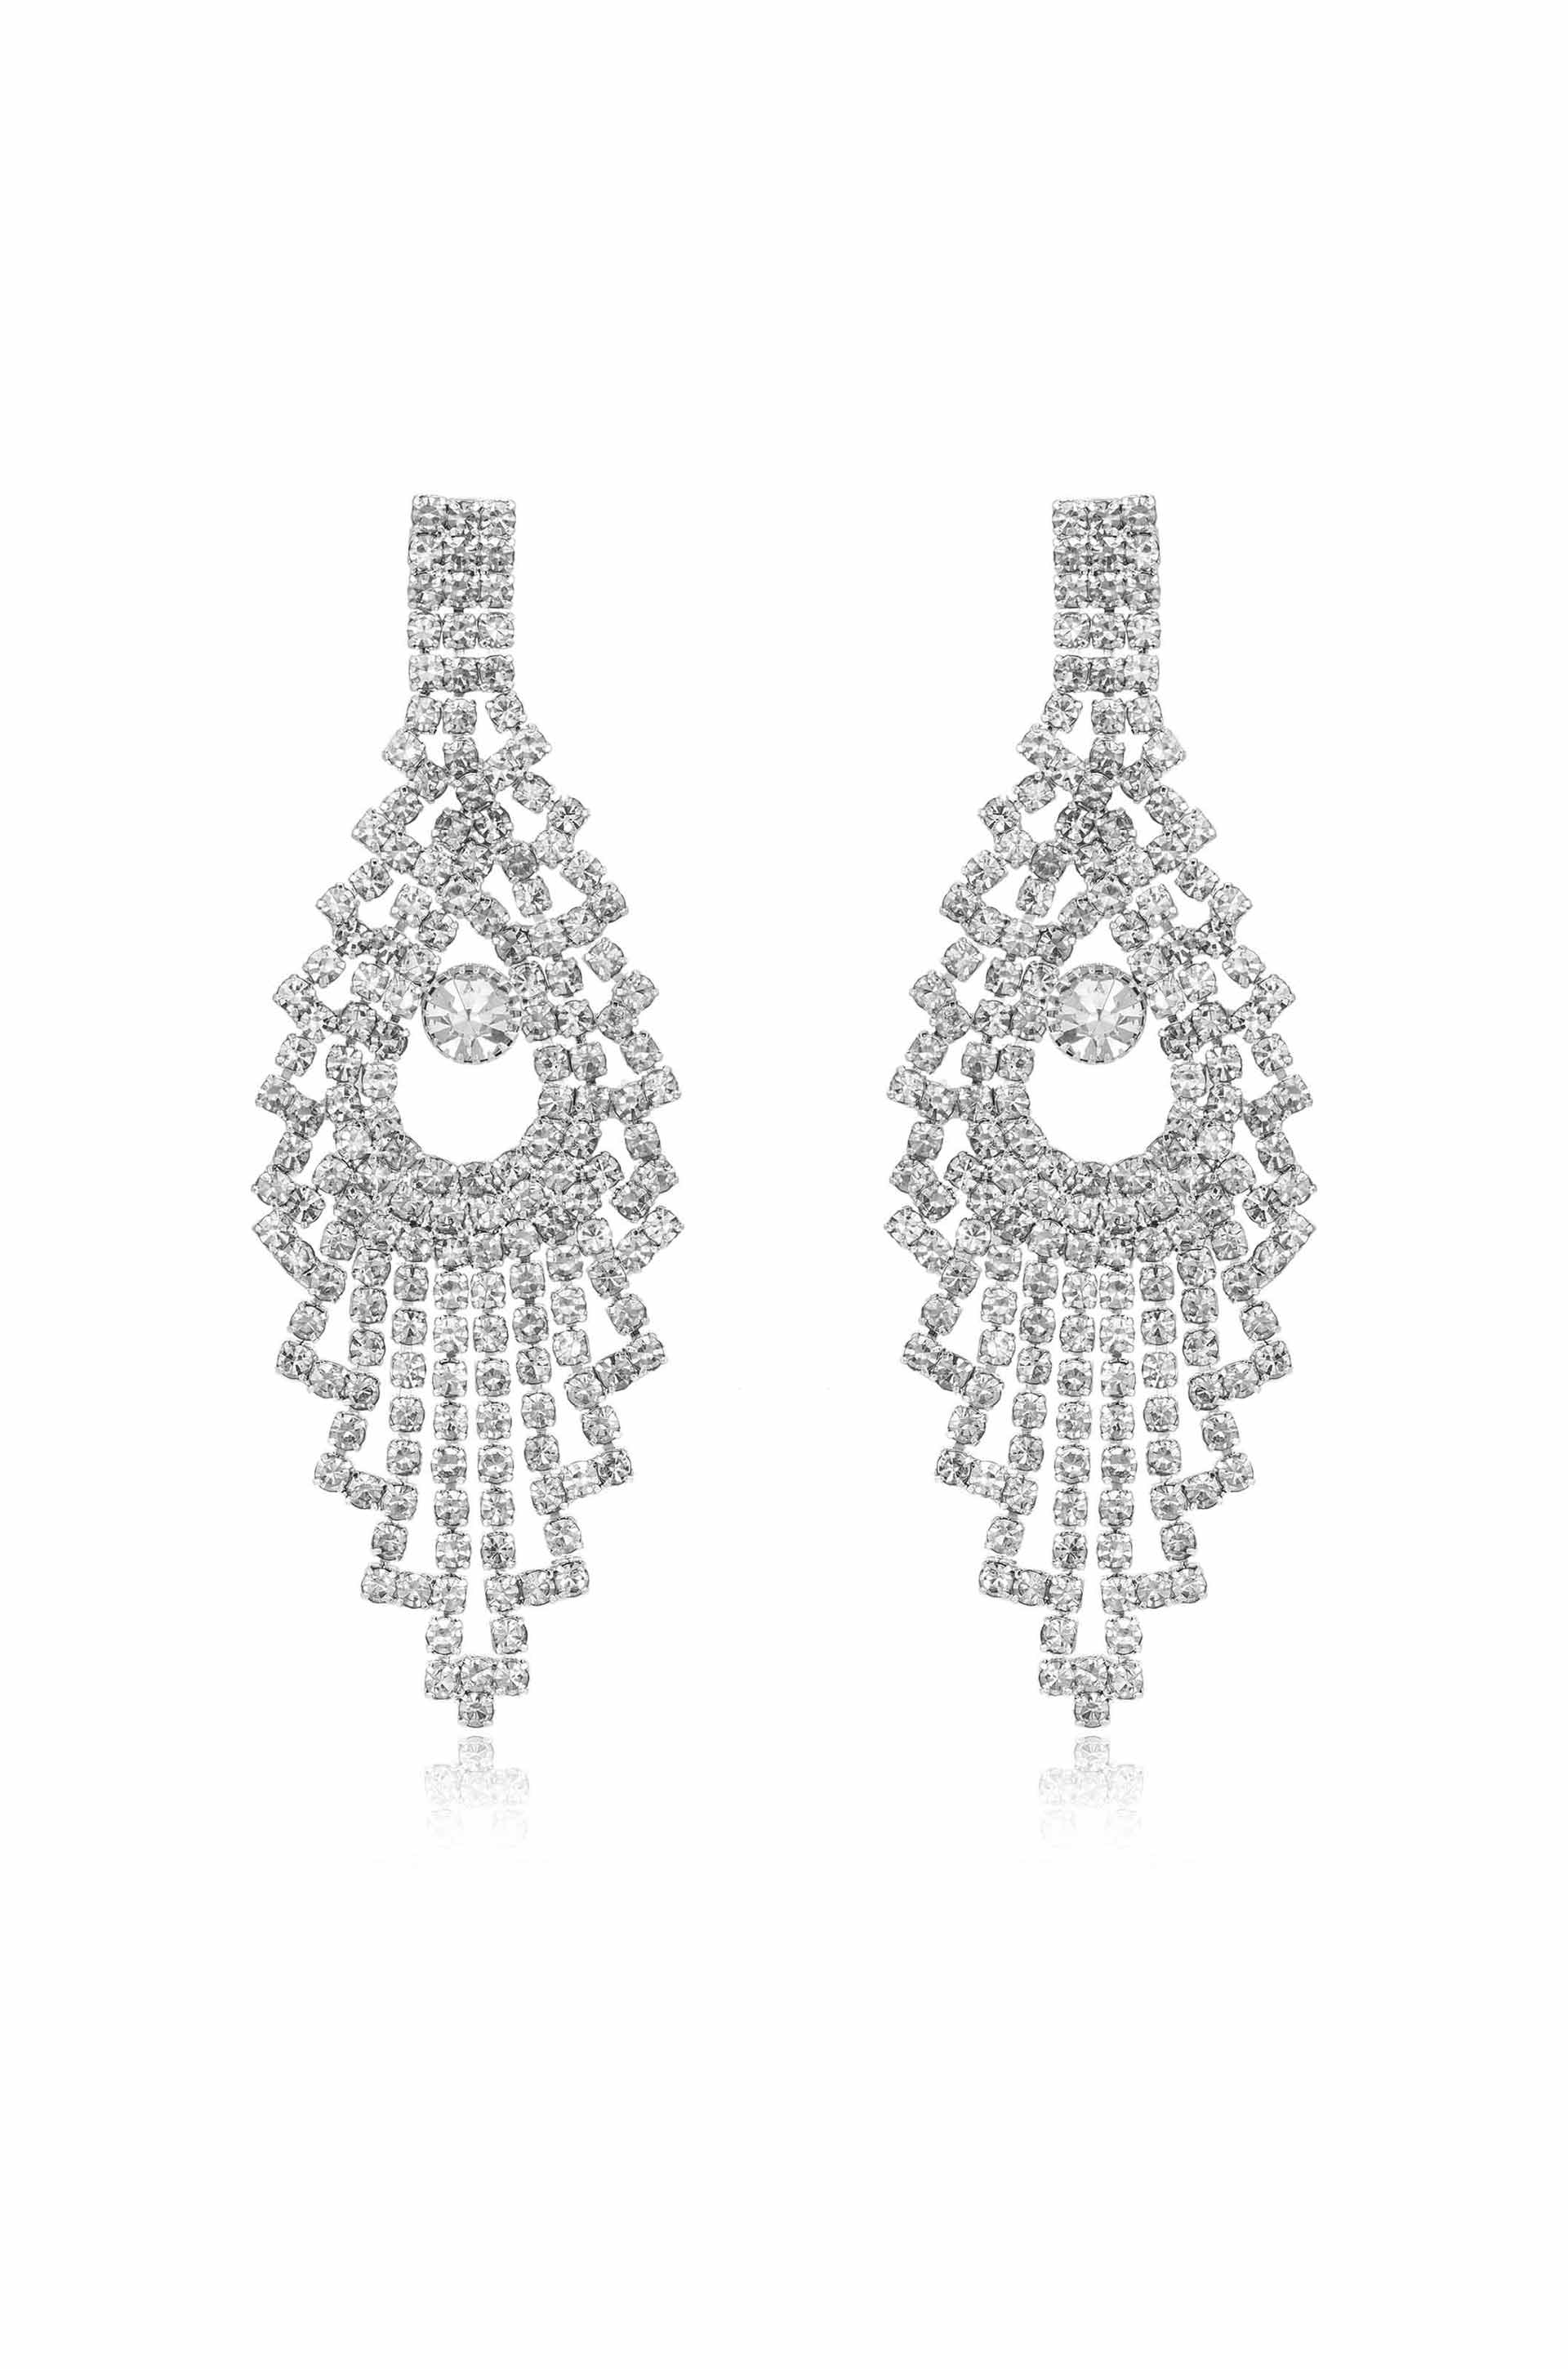 Charming Chandelier Crystal & Silver Plated Earrings